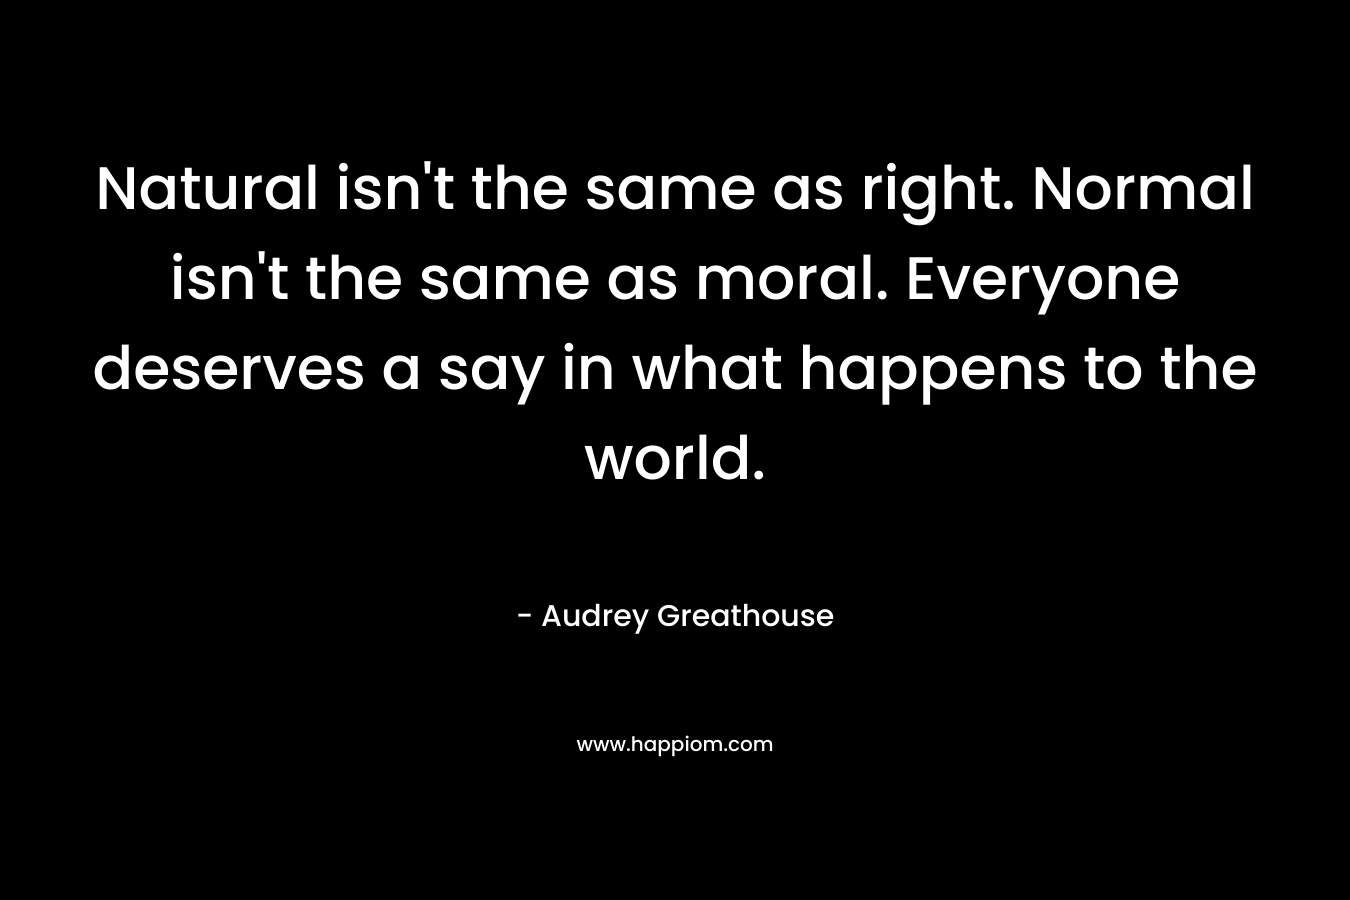 Natural isn't the same as right. Normal isn't the same as moral. Everyone deserves a say in what happens to the world.